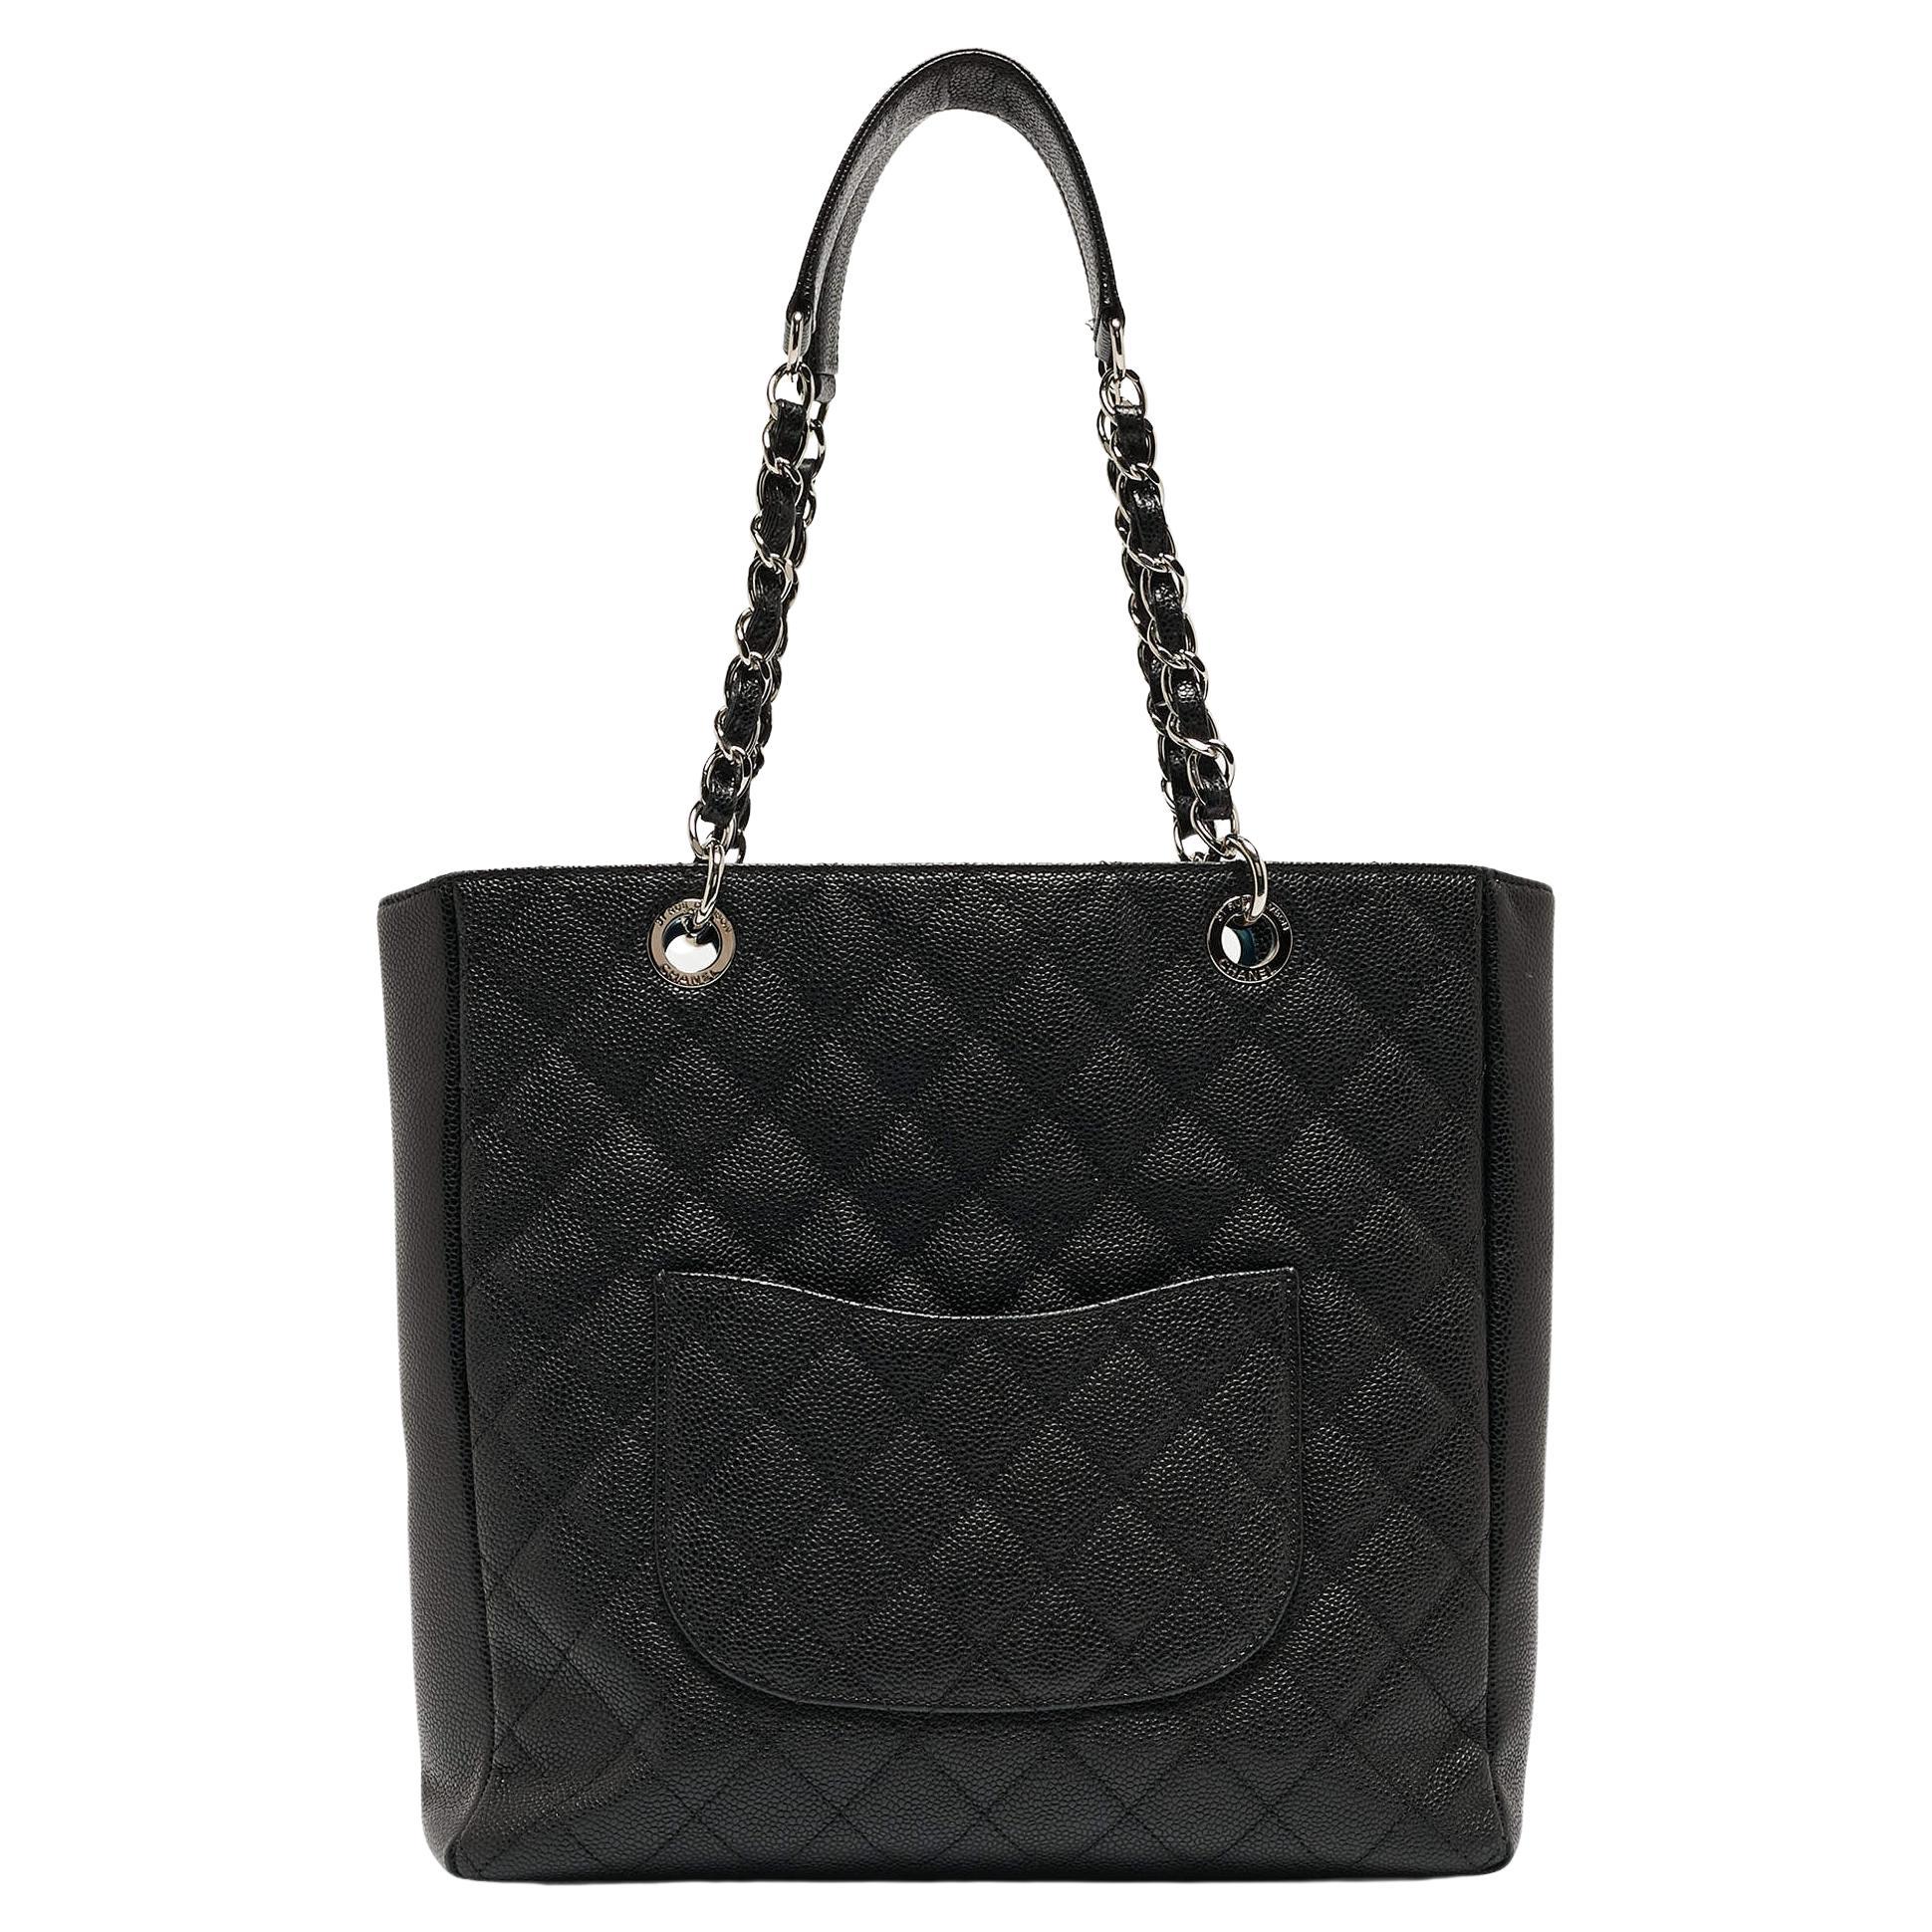 Chanel Black Caviar Quilted Leather CC Tote For Sale